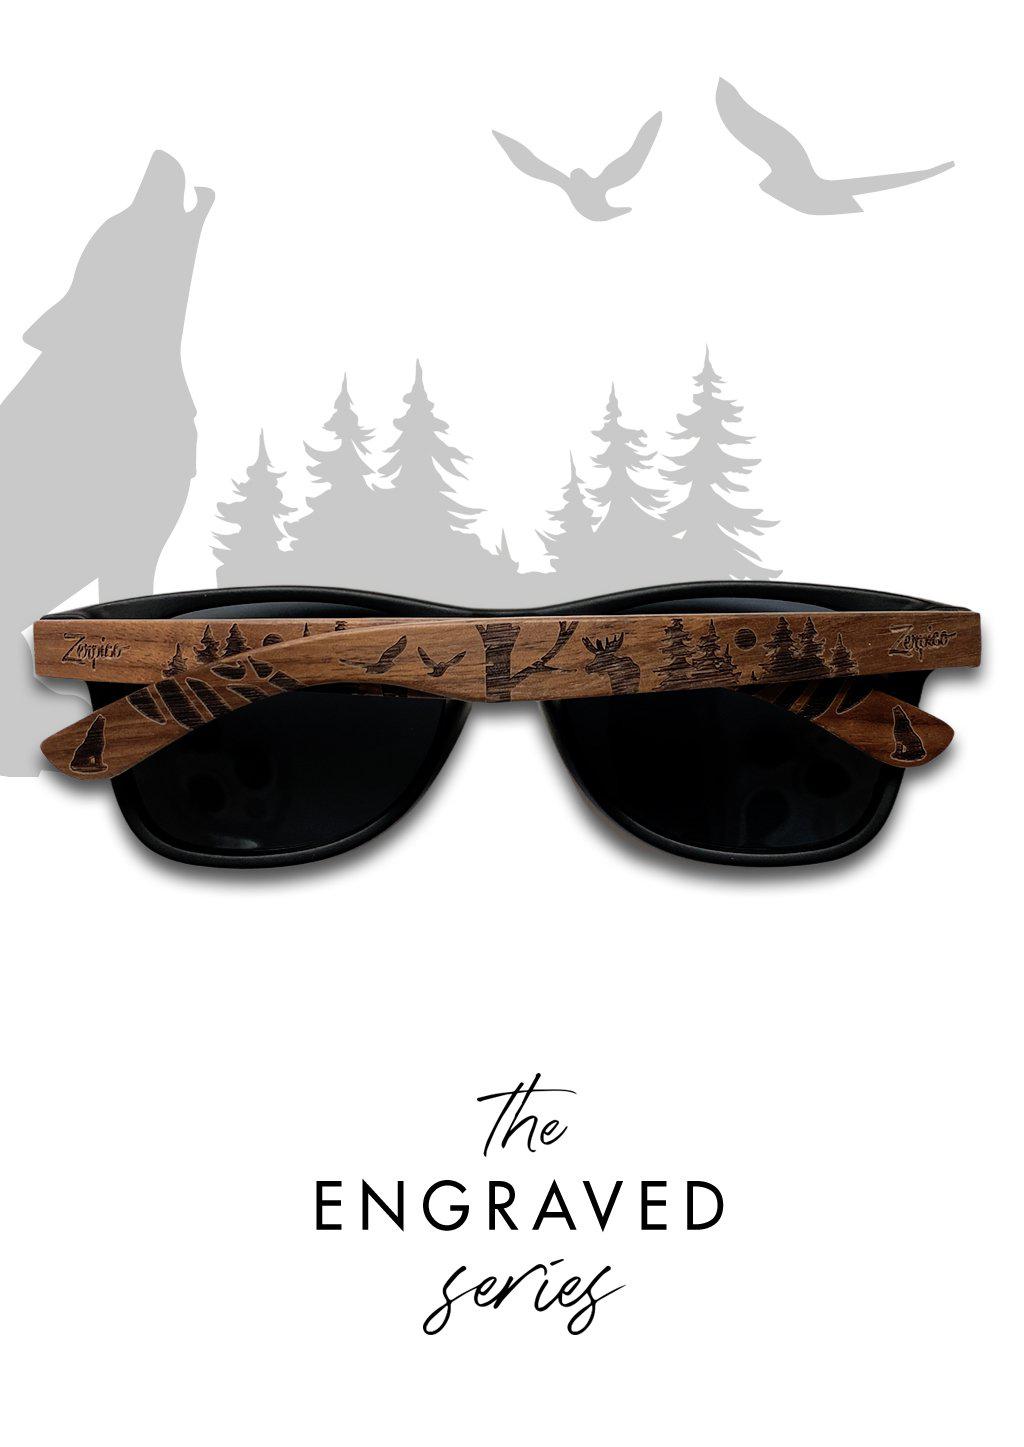 Engraved Wooden Sunglasses - The North is a pair of engraved sunglasses with a pattern from the nordic countries.